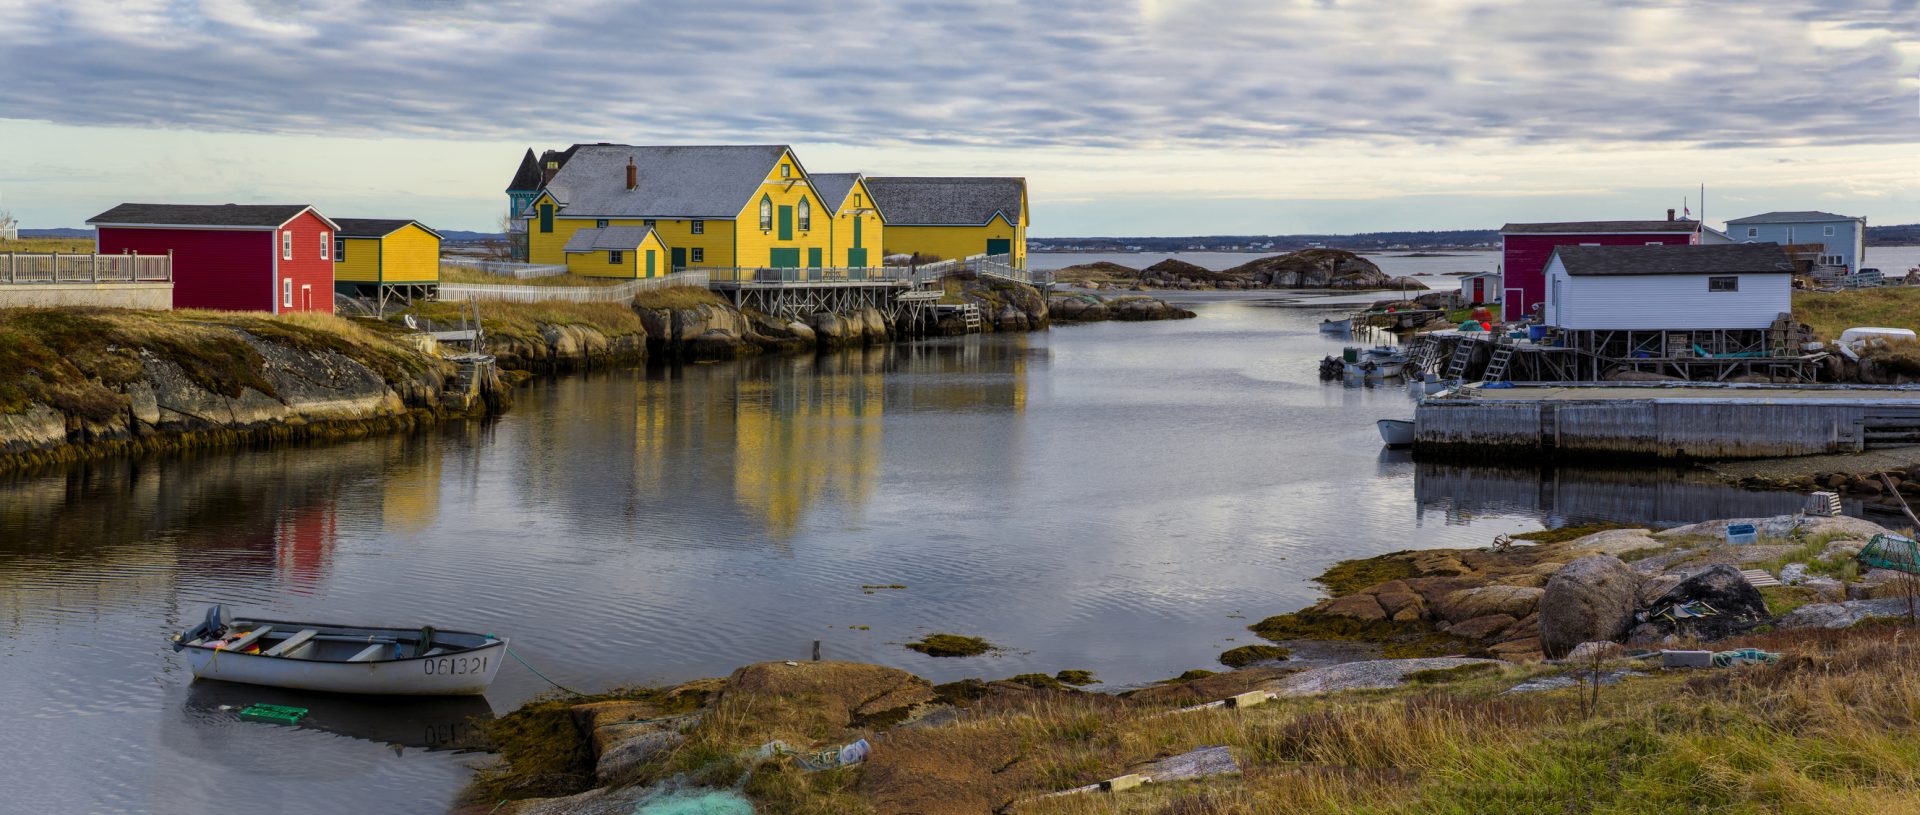 Waterfront in Newfoundland